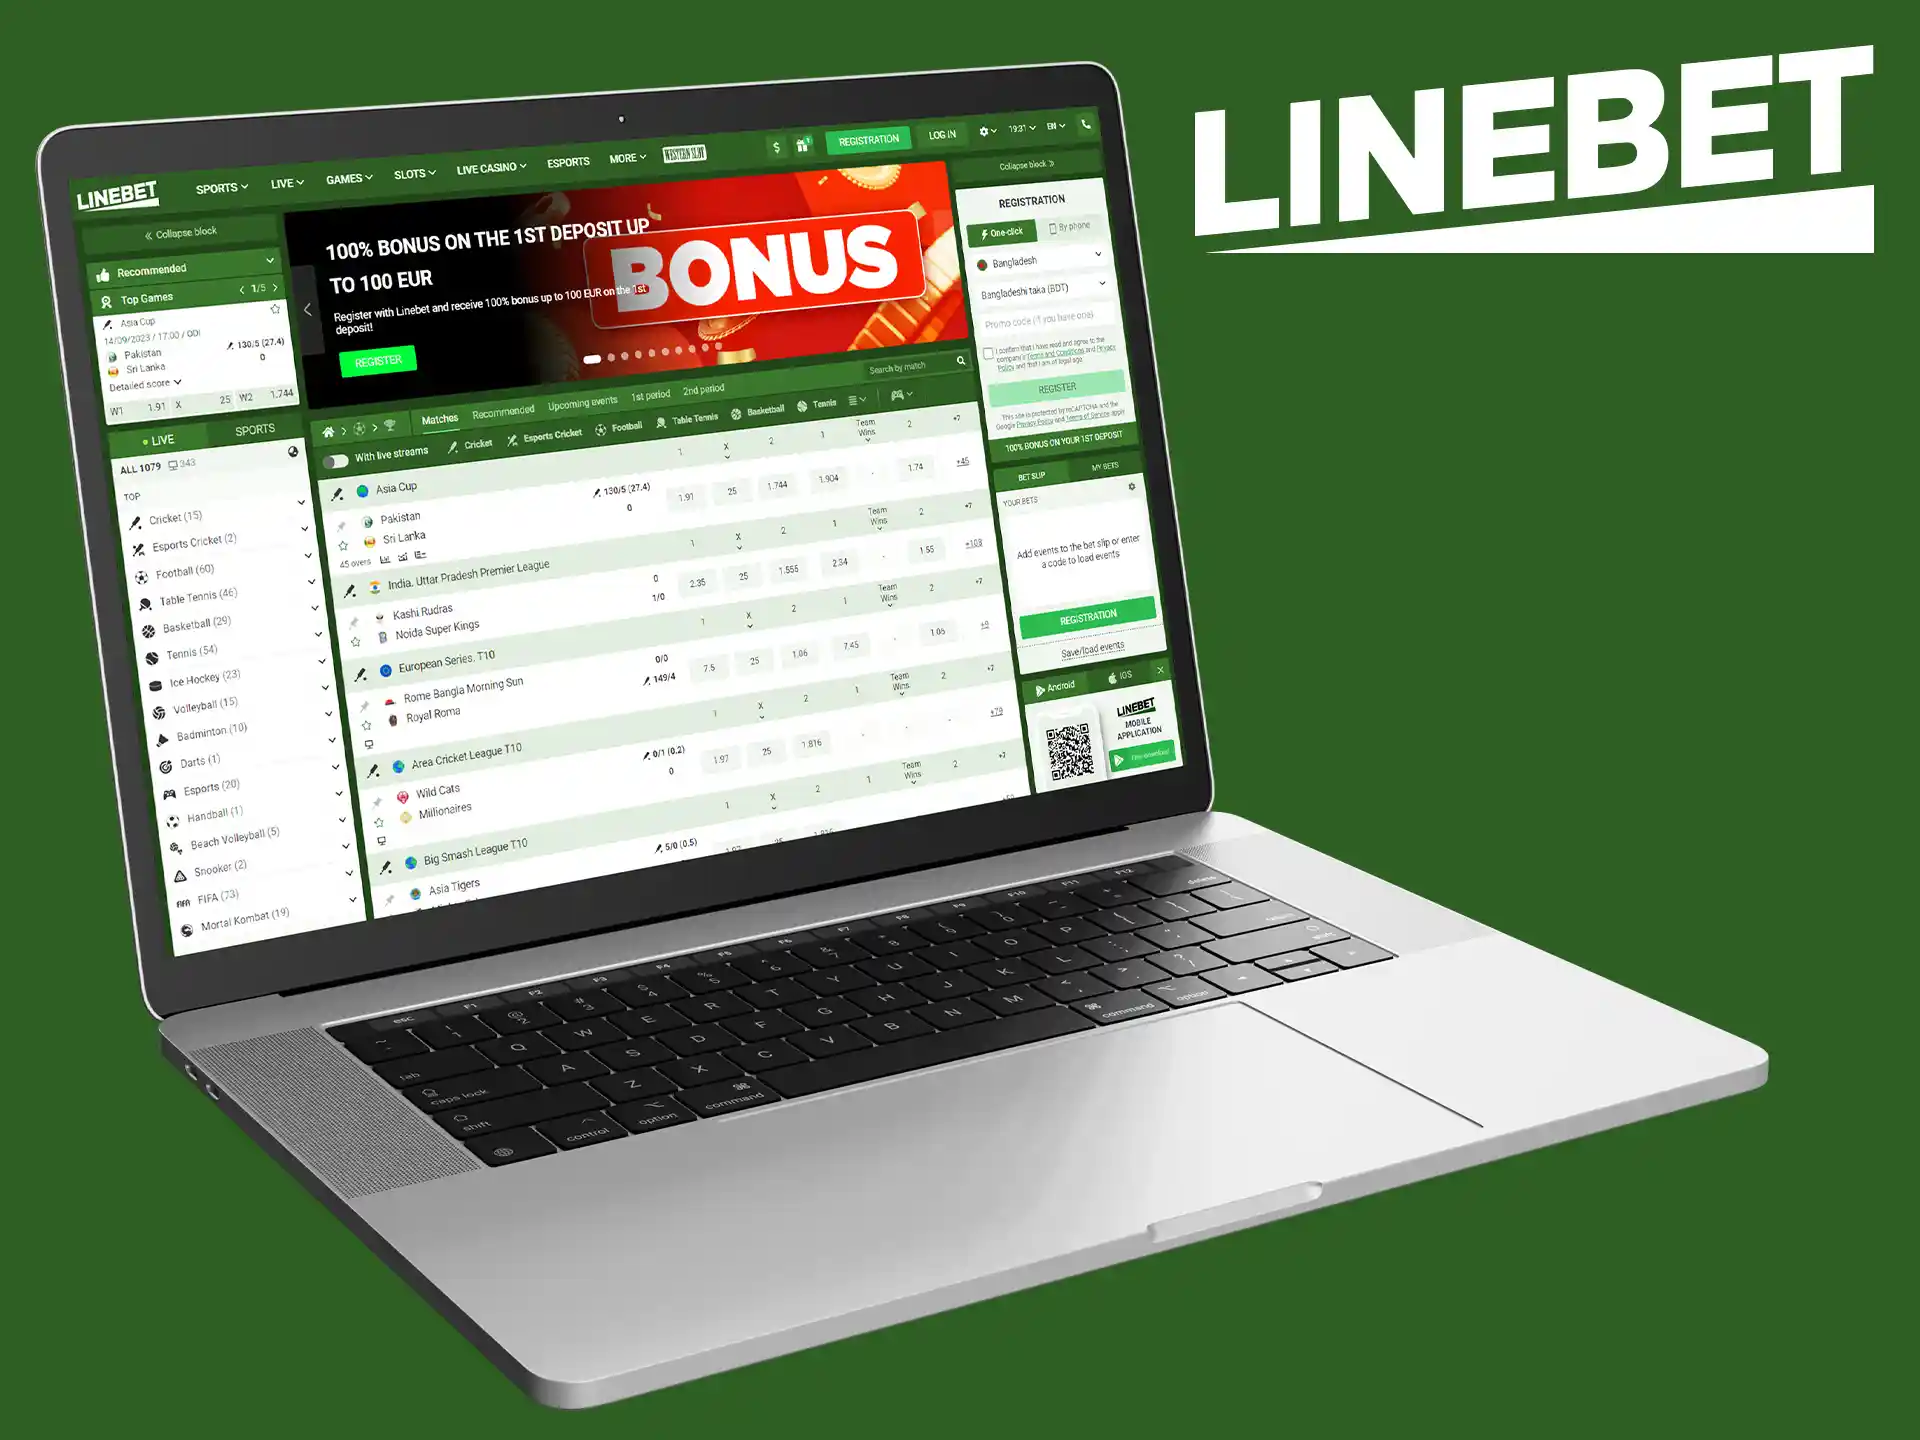 Get a welcome bonus and double your first deposit at Linebet.